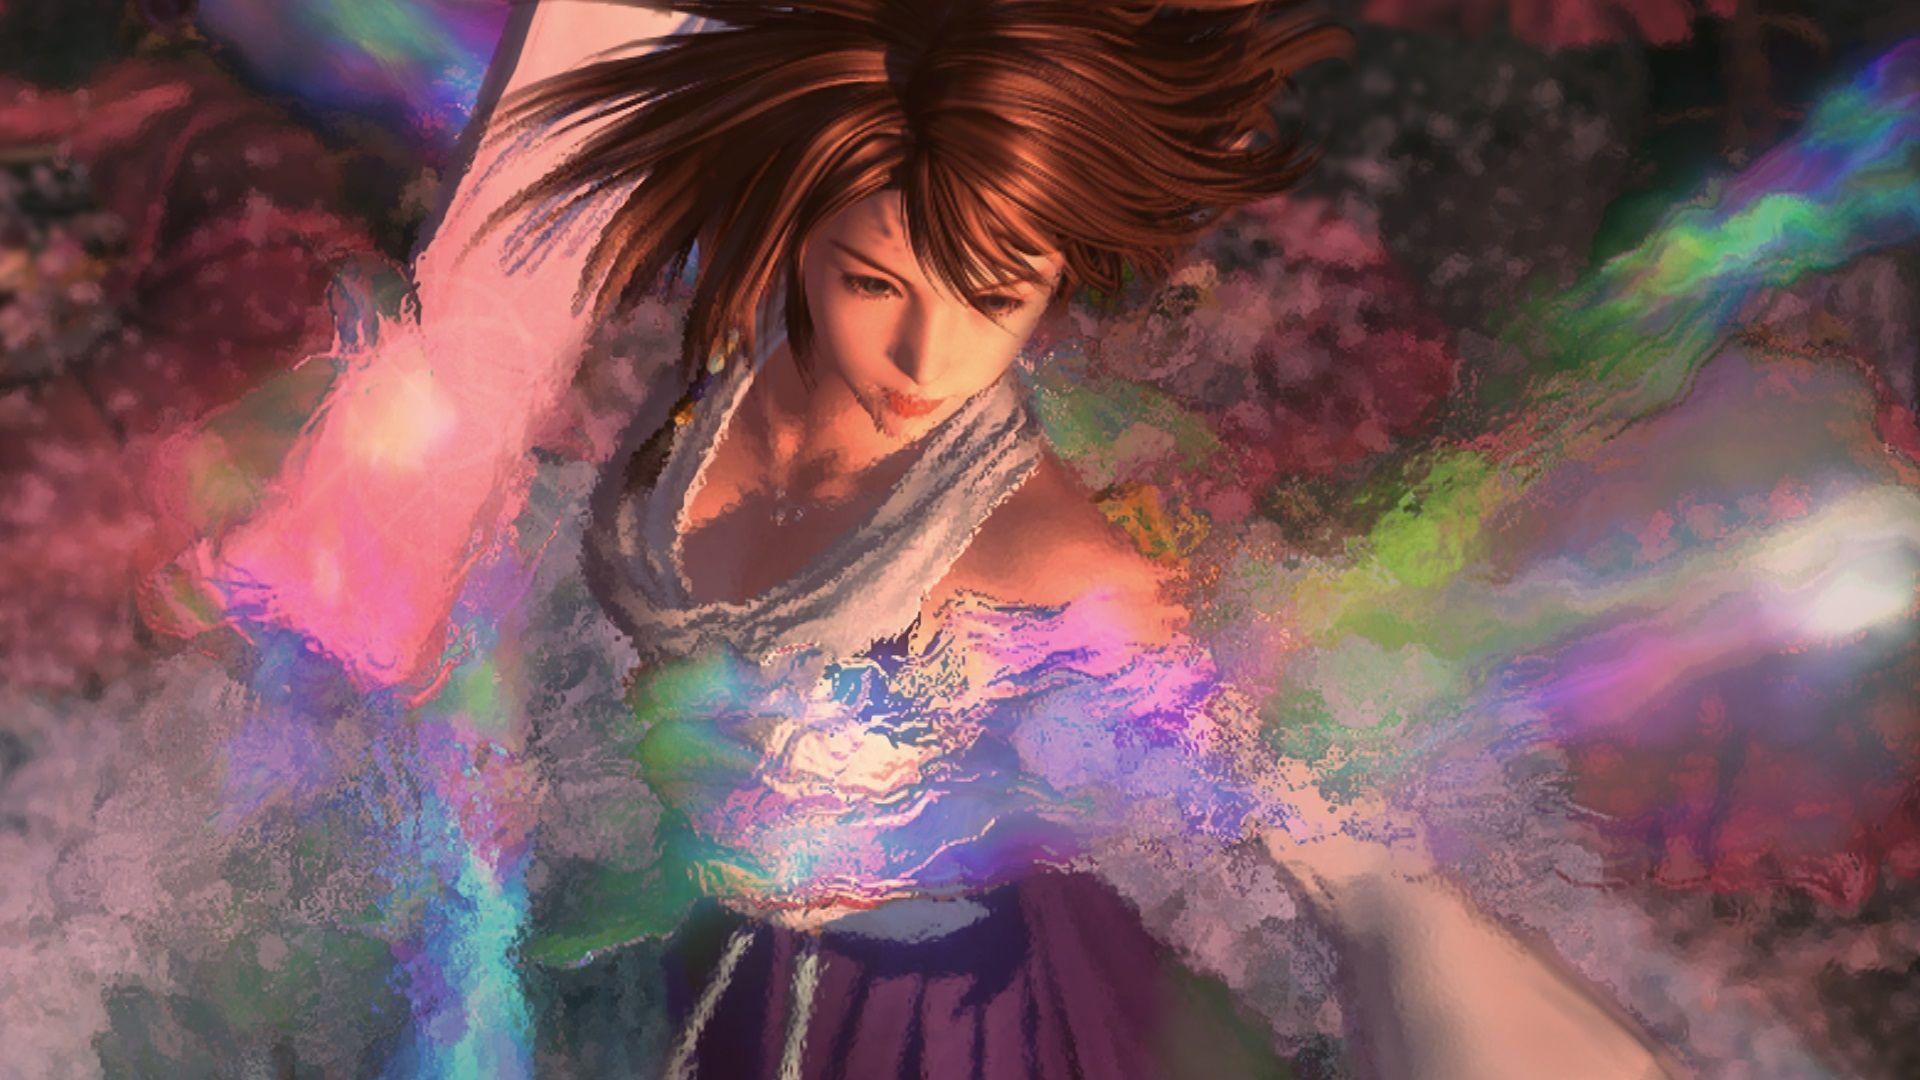 Final Fantasy X: an ode to Tidus and Yuna Fantasy X